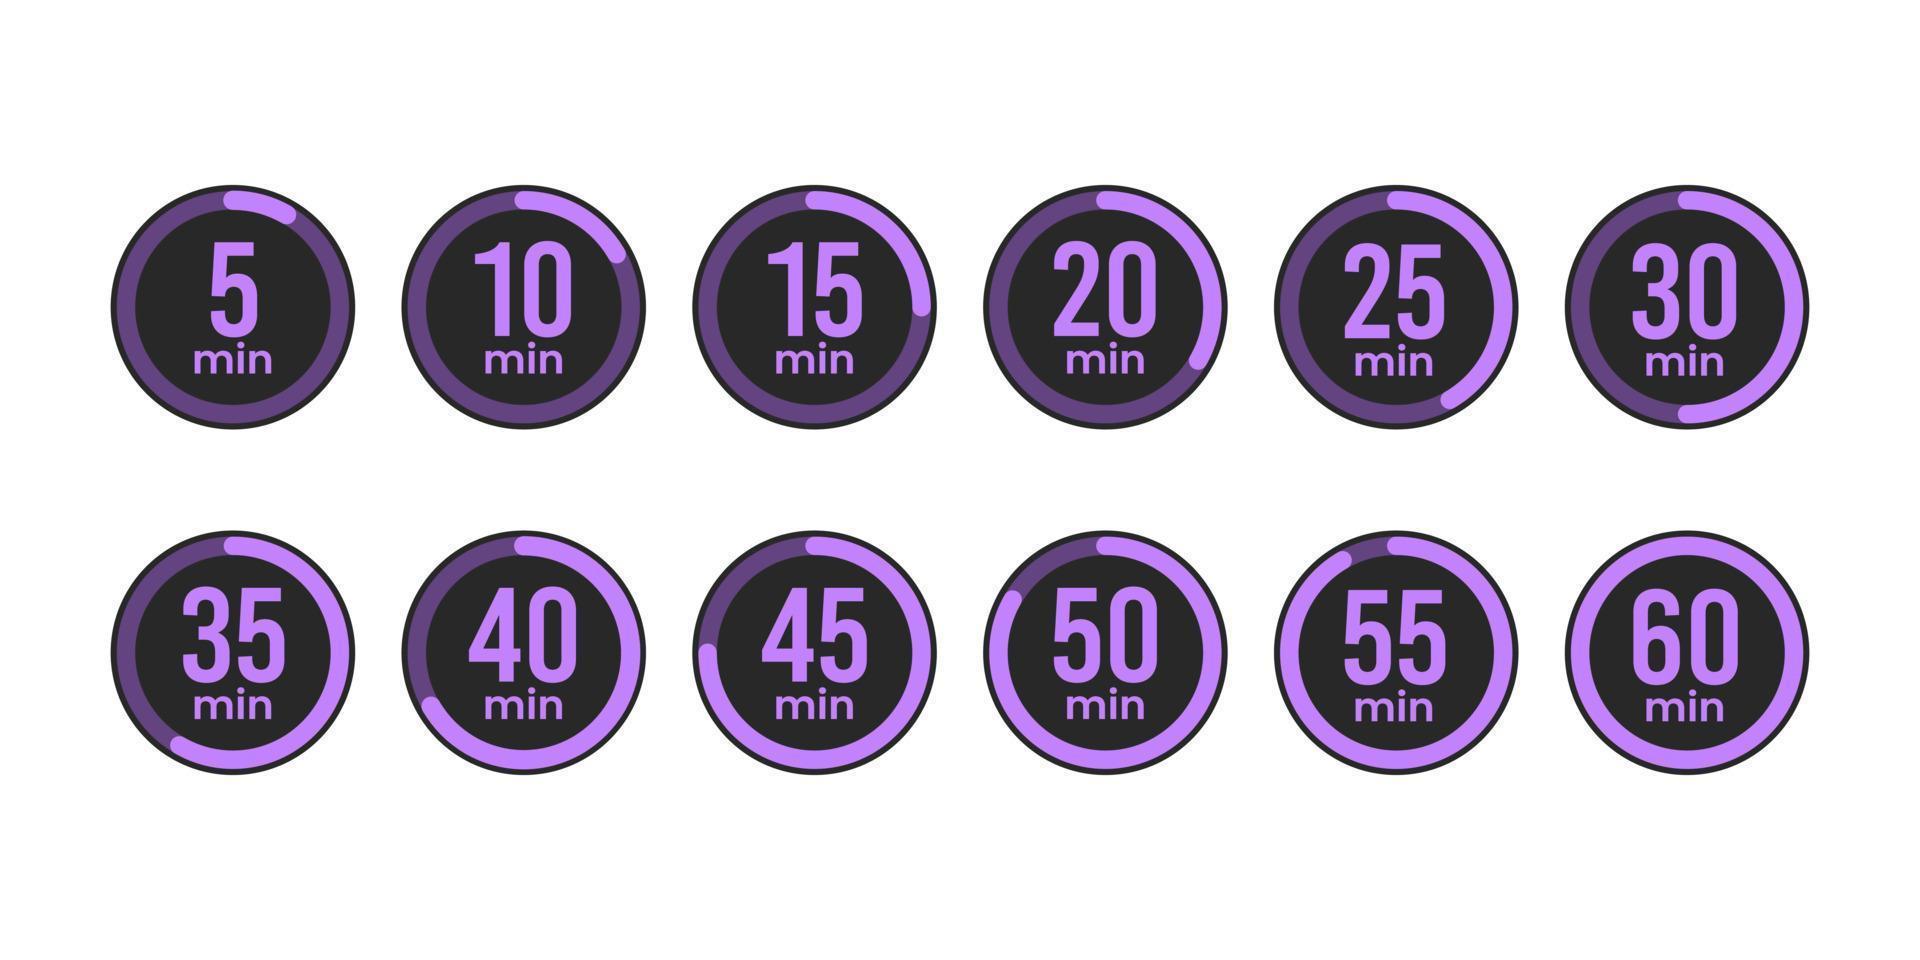 Set of purple digital stopwatch faces showing the time every 5 minutes vector